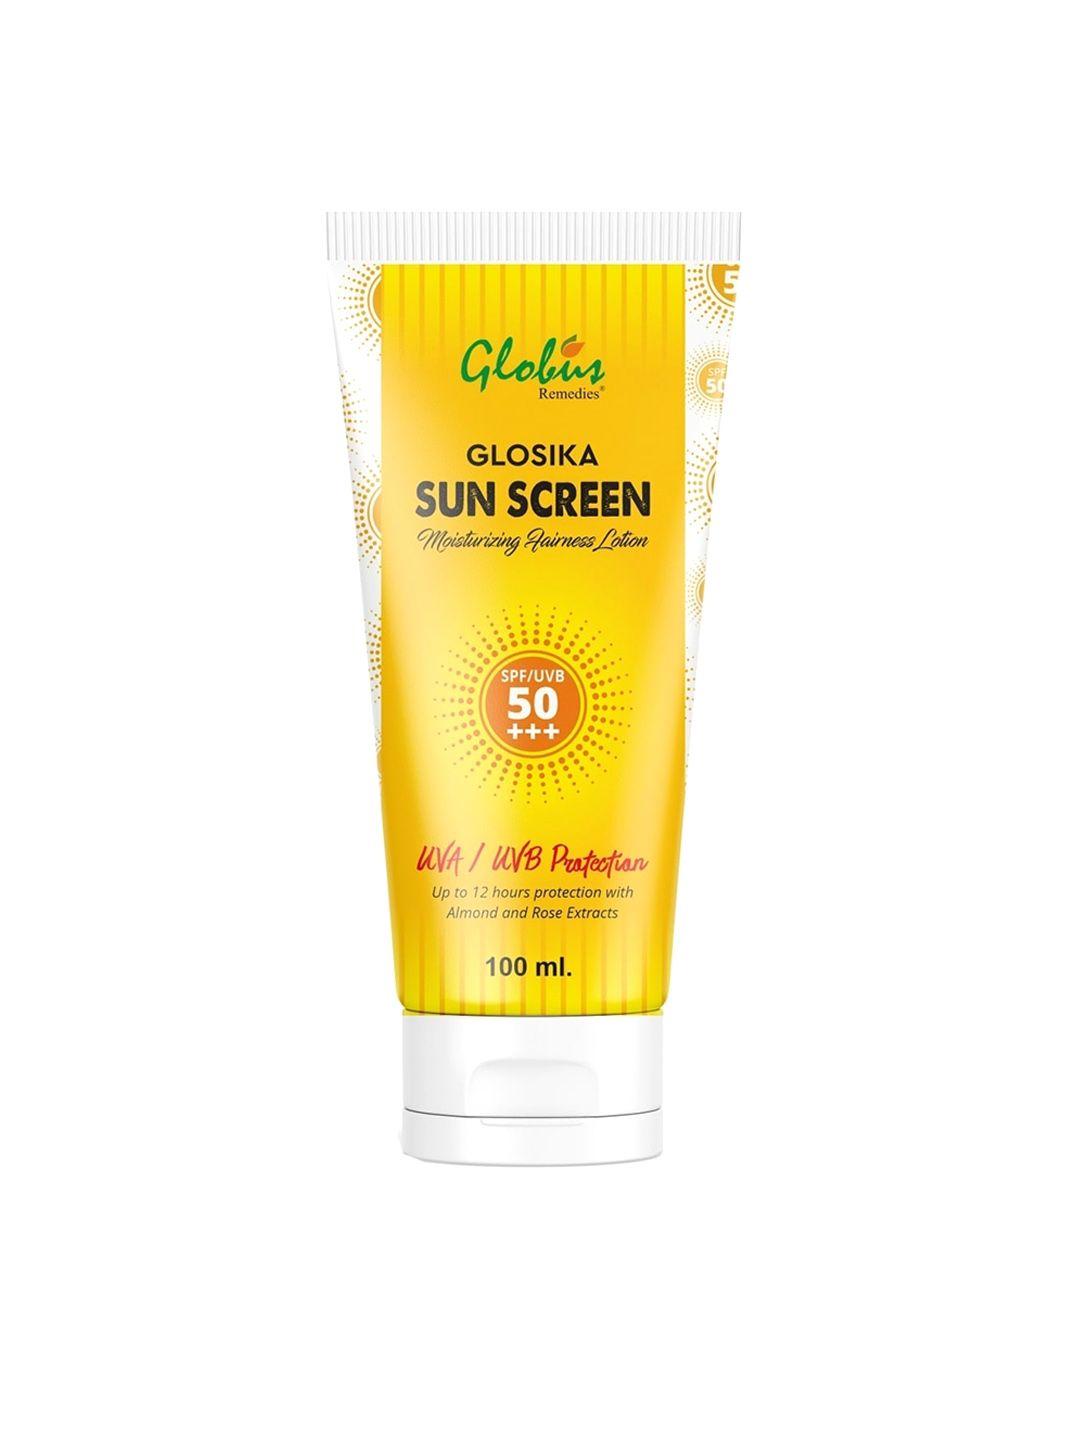 globus remedies glosika sunscreen lotion, up to 12hrs protection